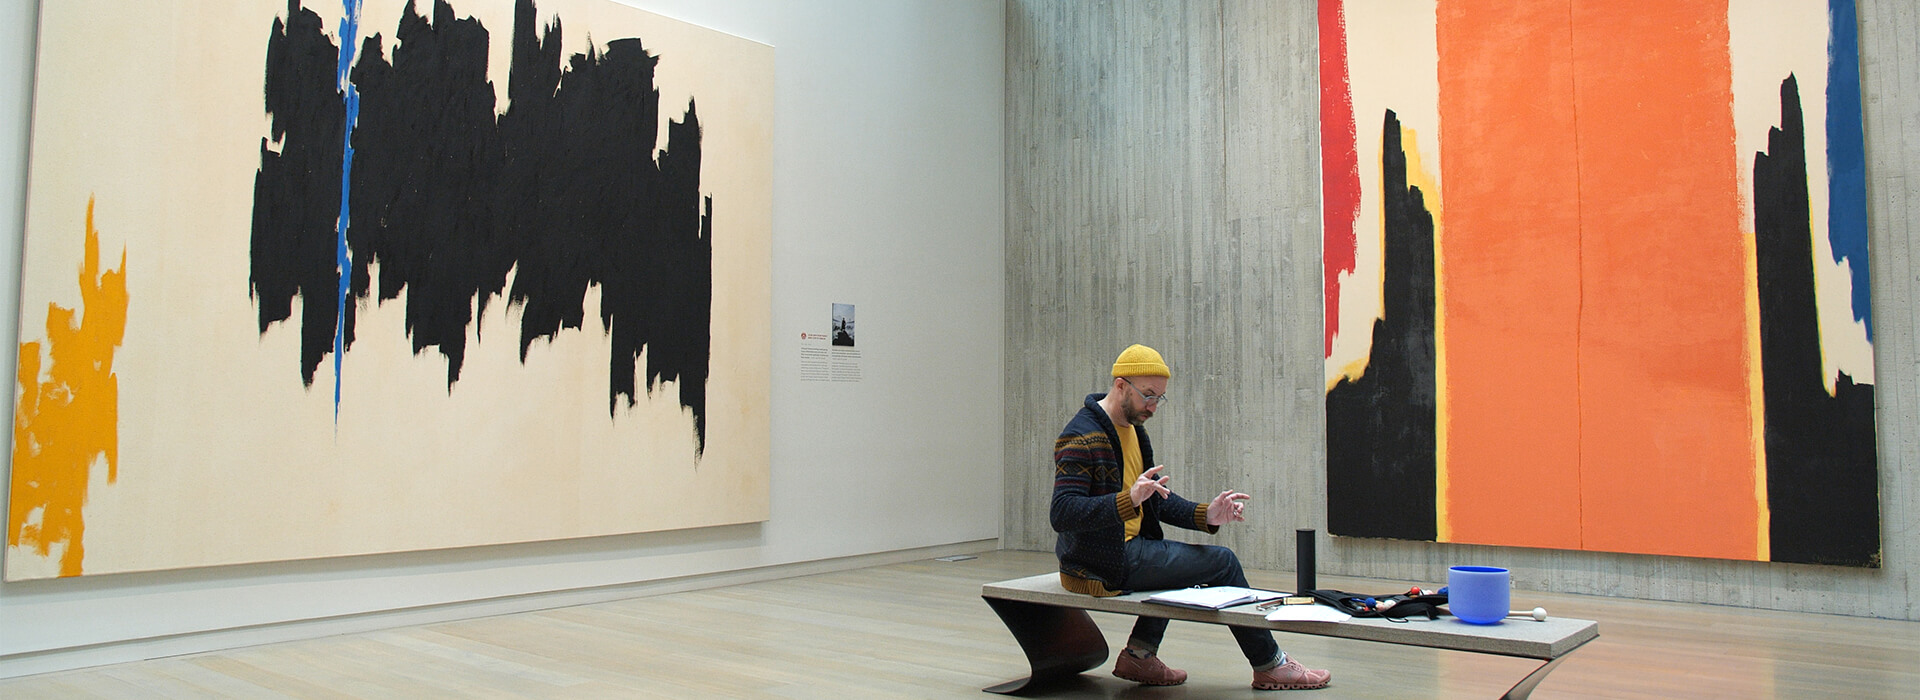 A man sits on a bench with musical equipment in an art gallery